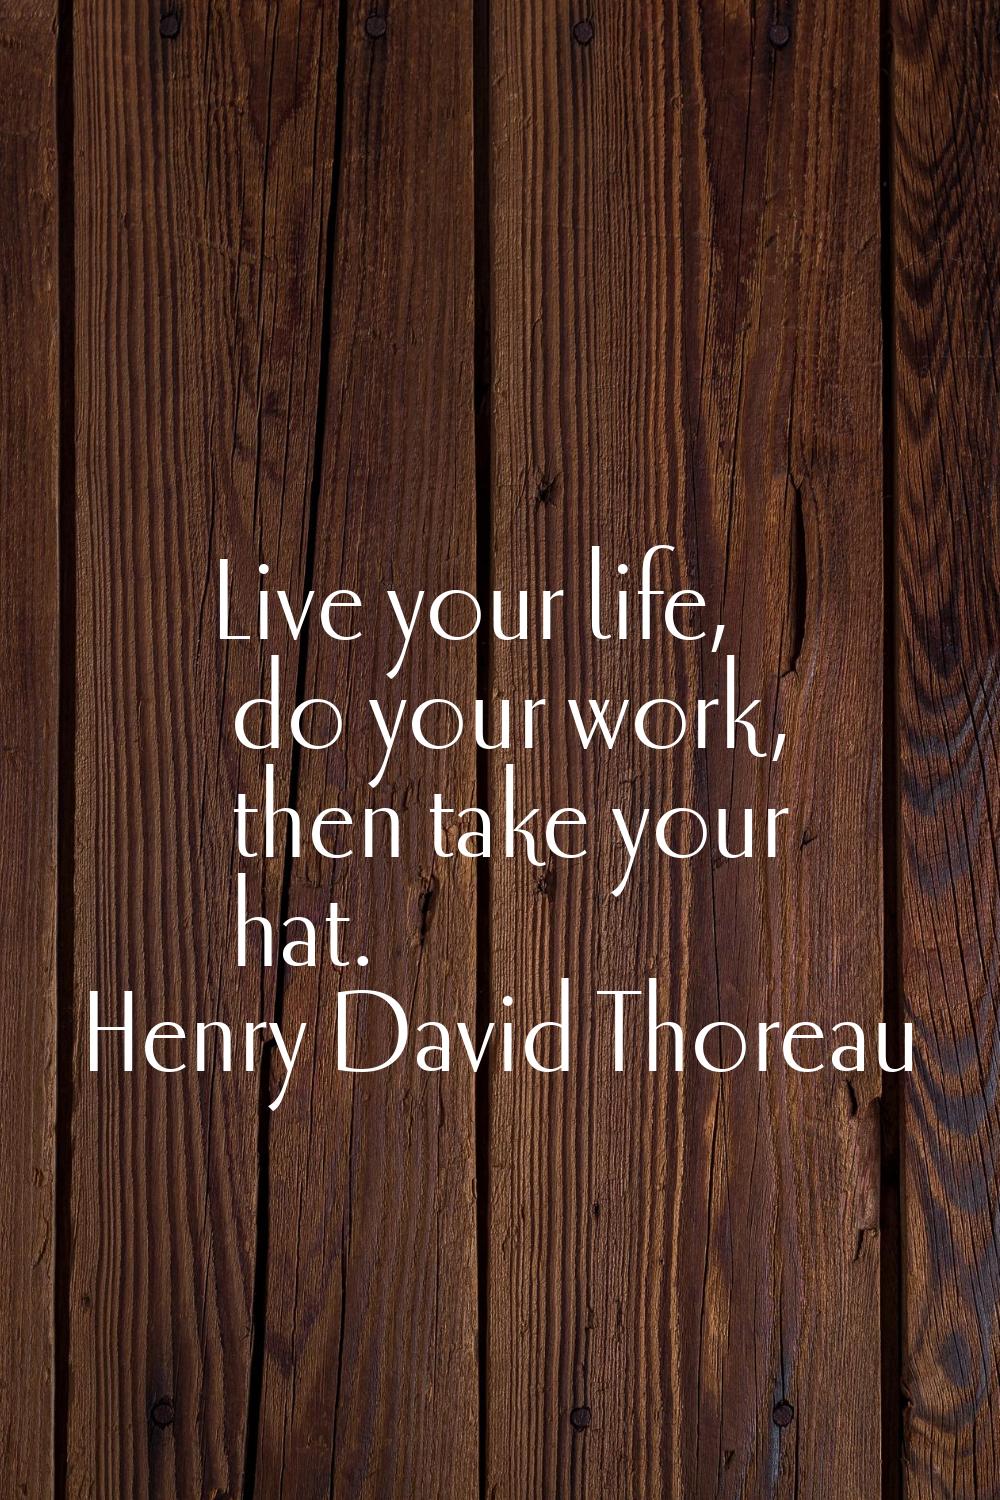 Live your life, do your work, then take your hat.